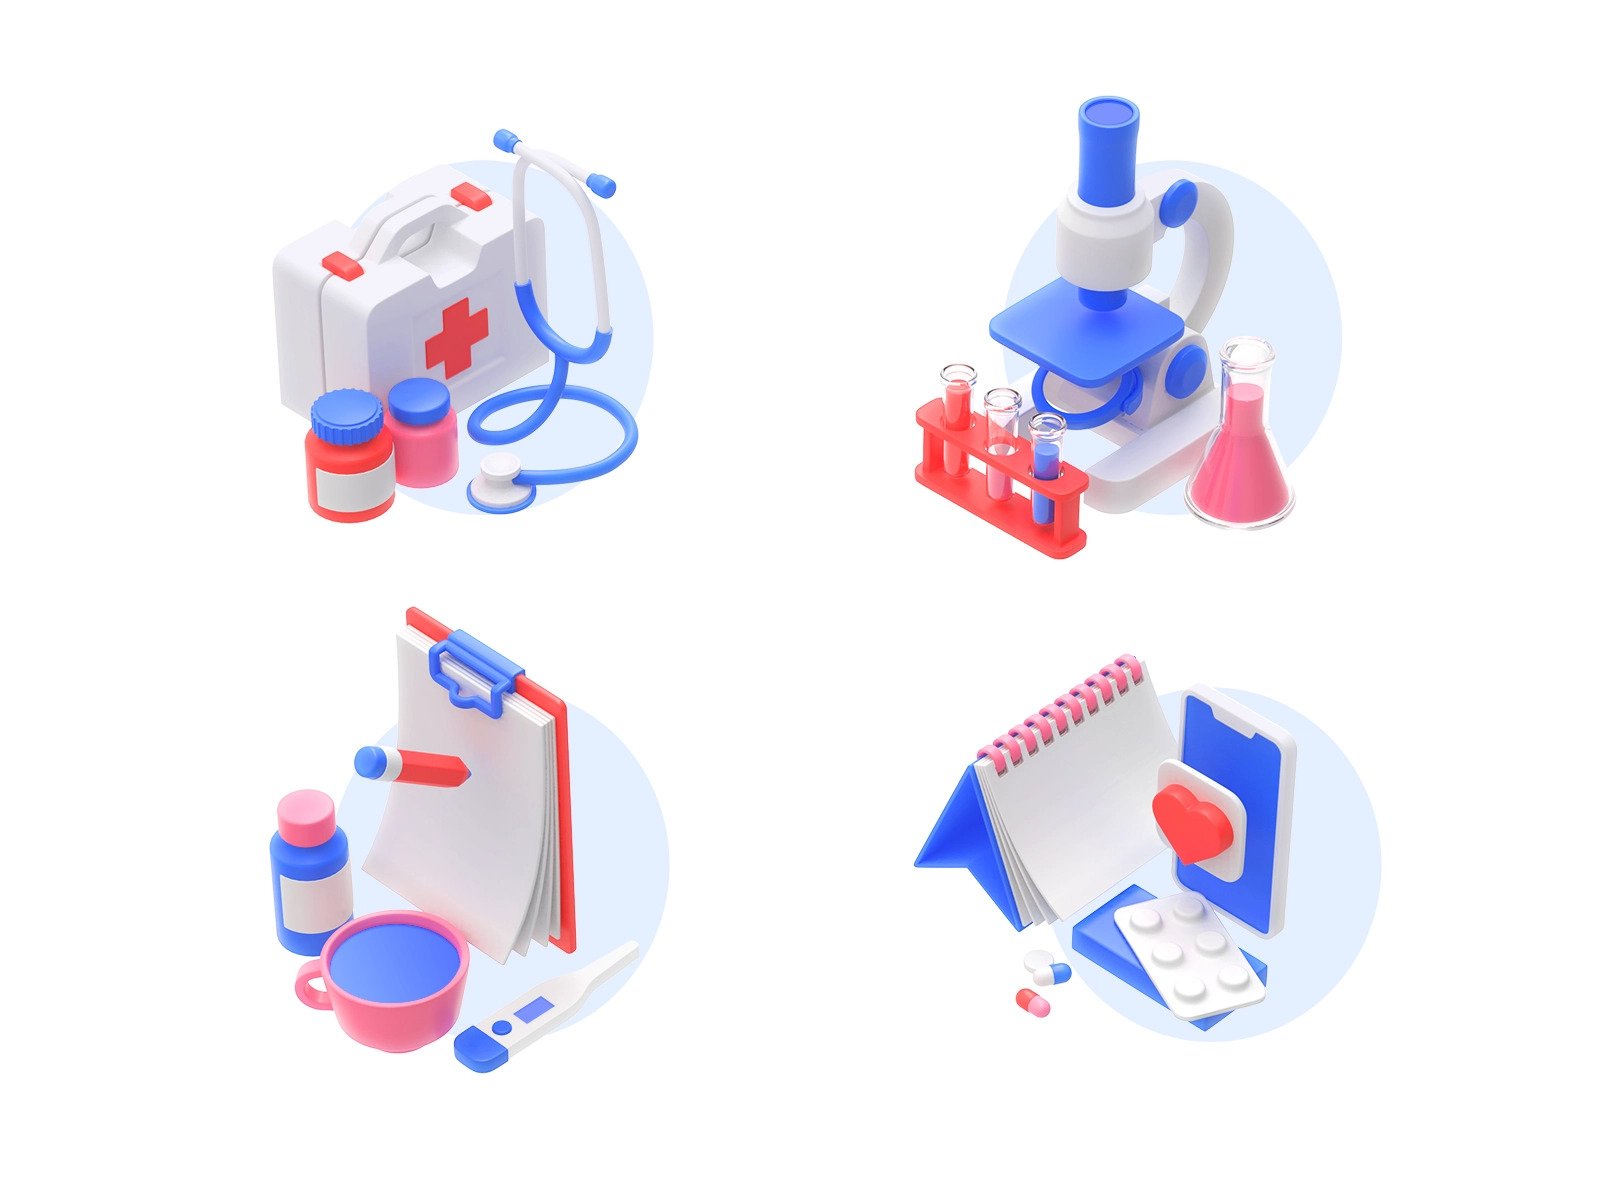 3D icons design by Shakuro